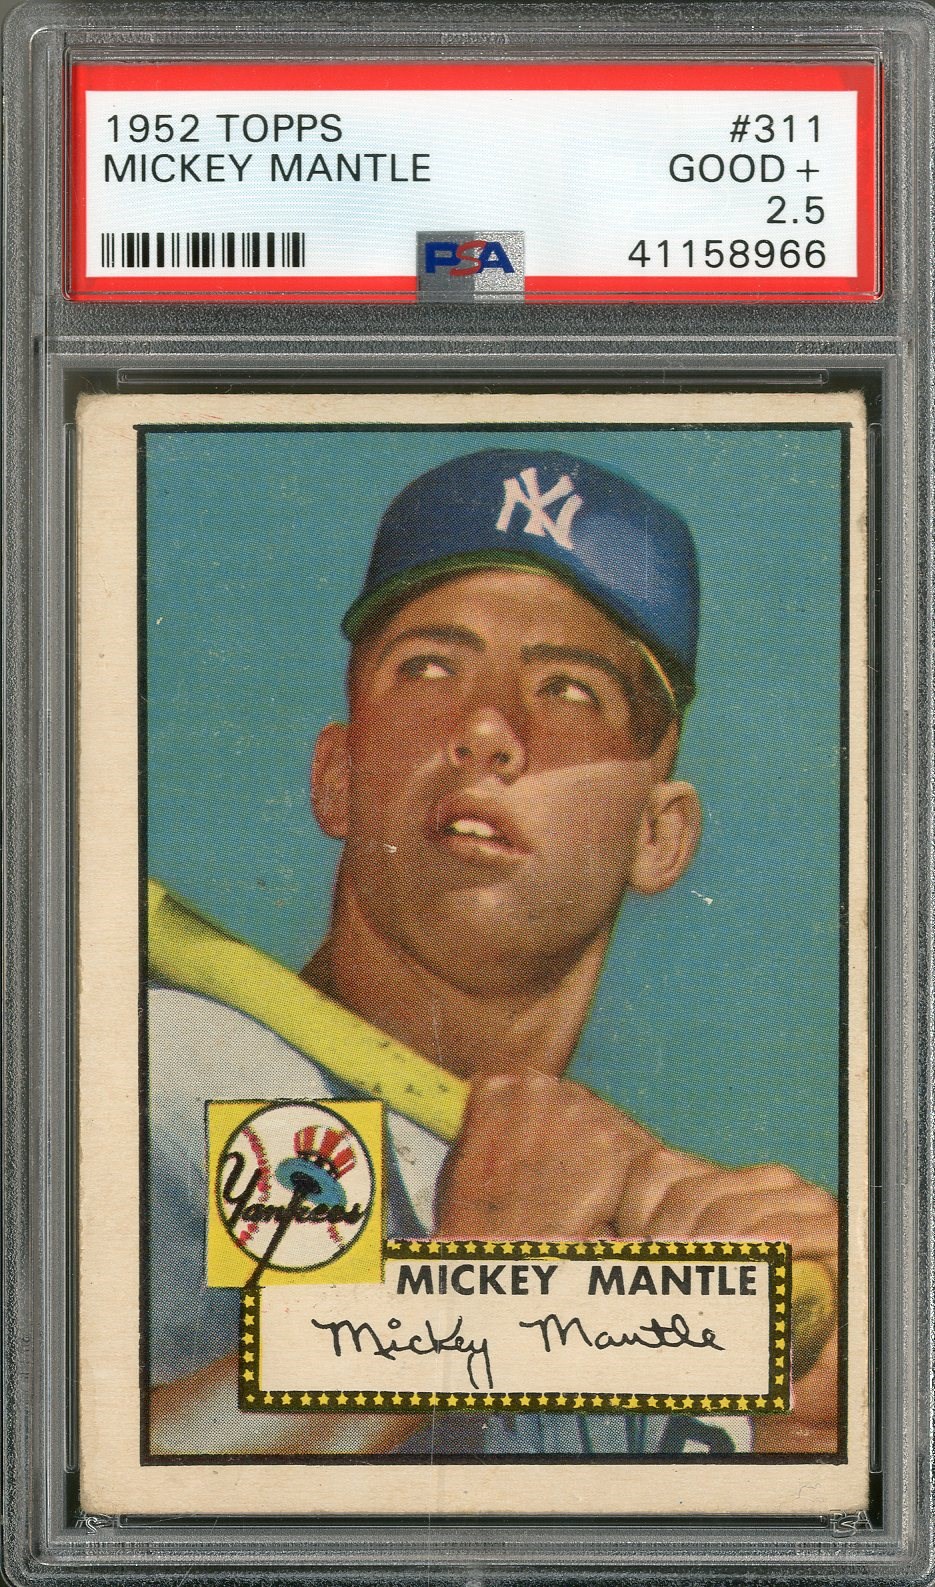 - 1952 Topps Mickey Mantle #311 Rookie (PSA GD+ 2.5)